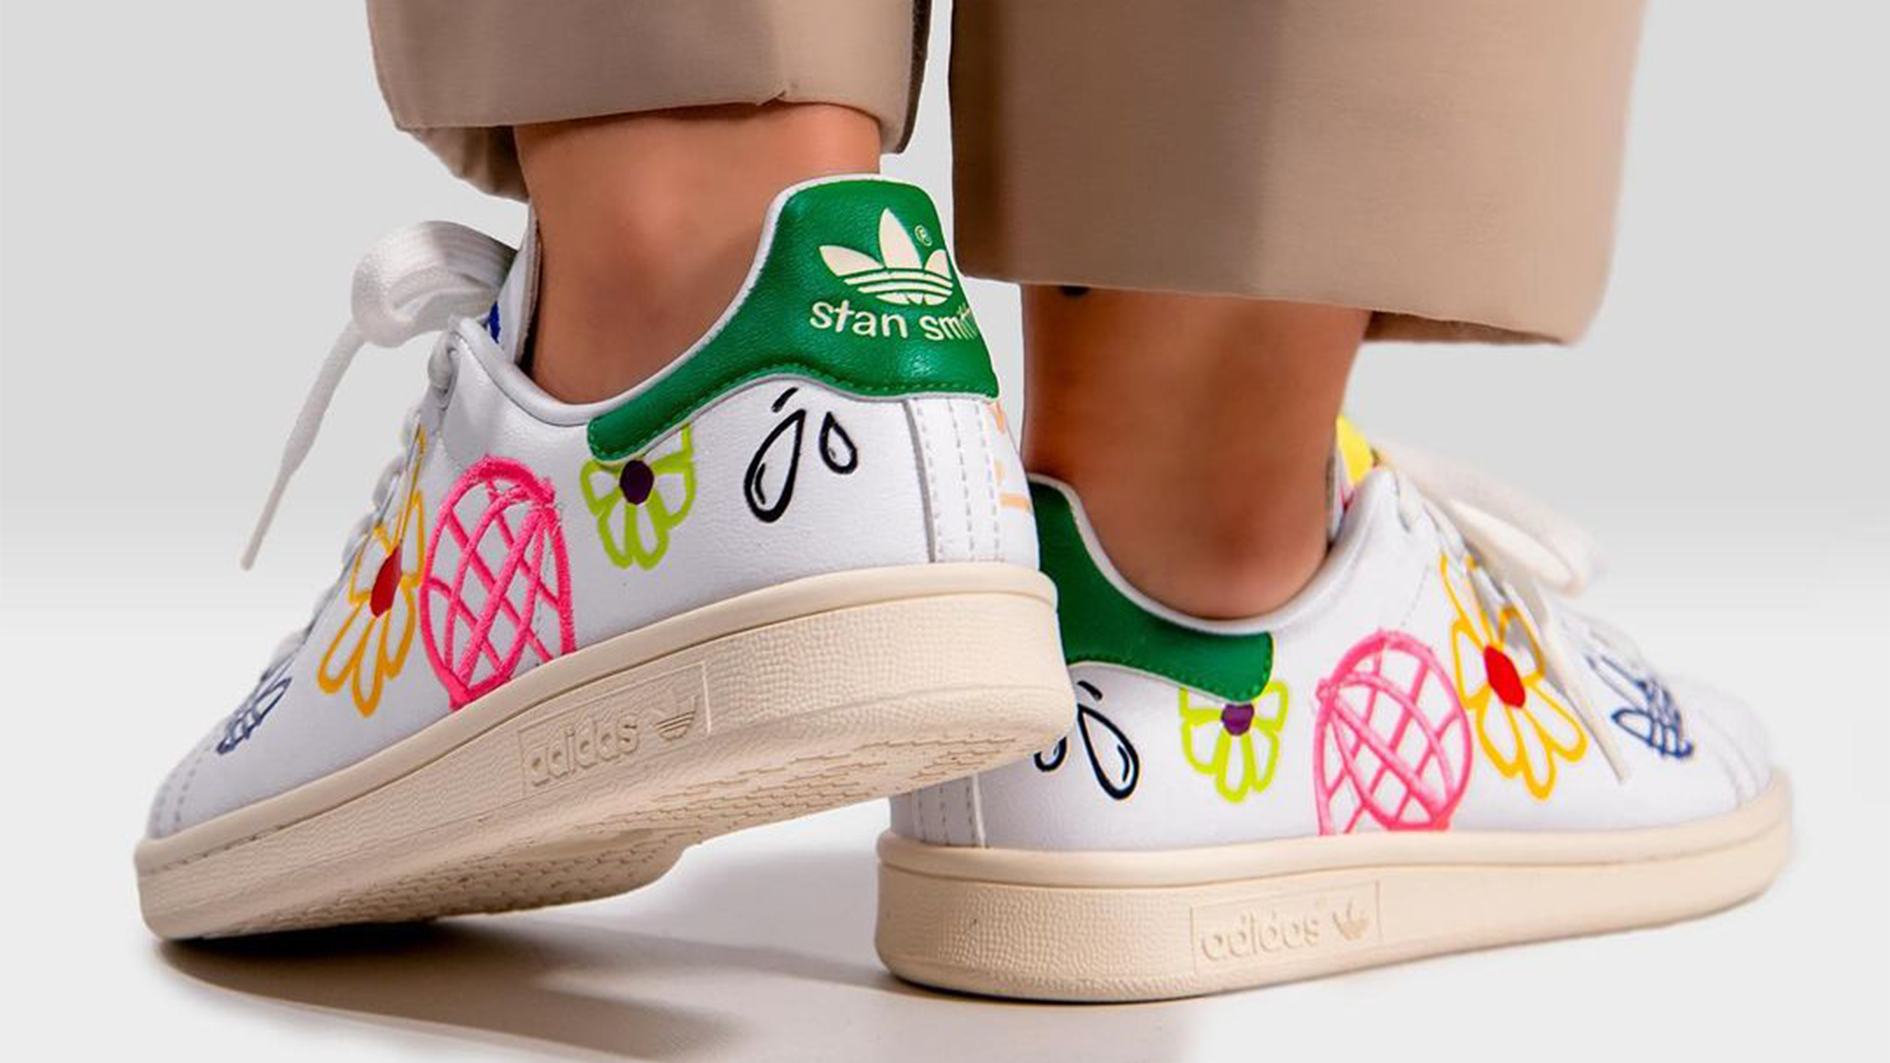 adidas Stan Smith Sizing: They | The Sole